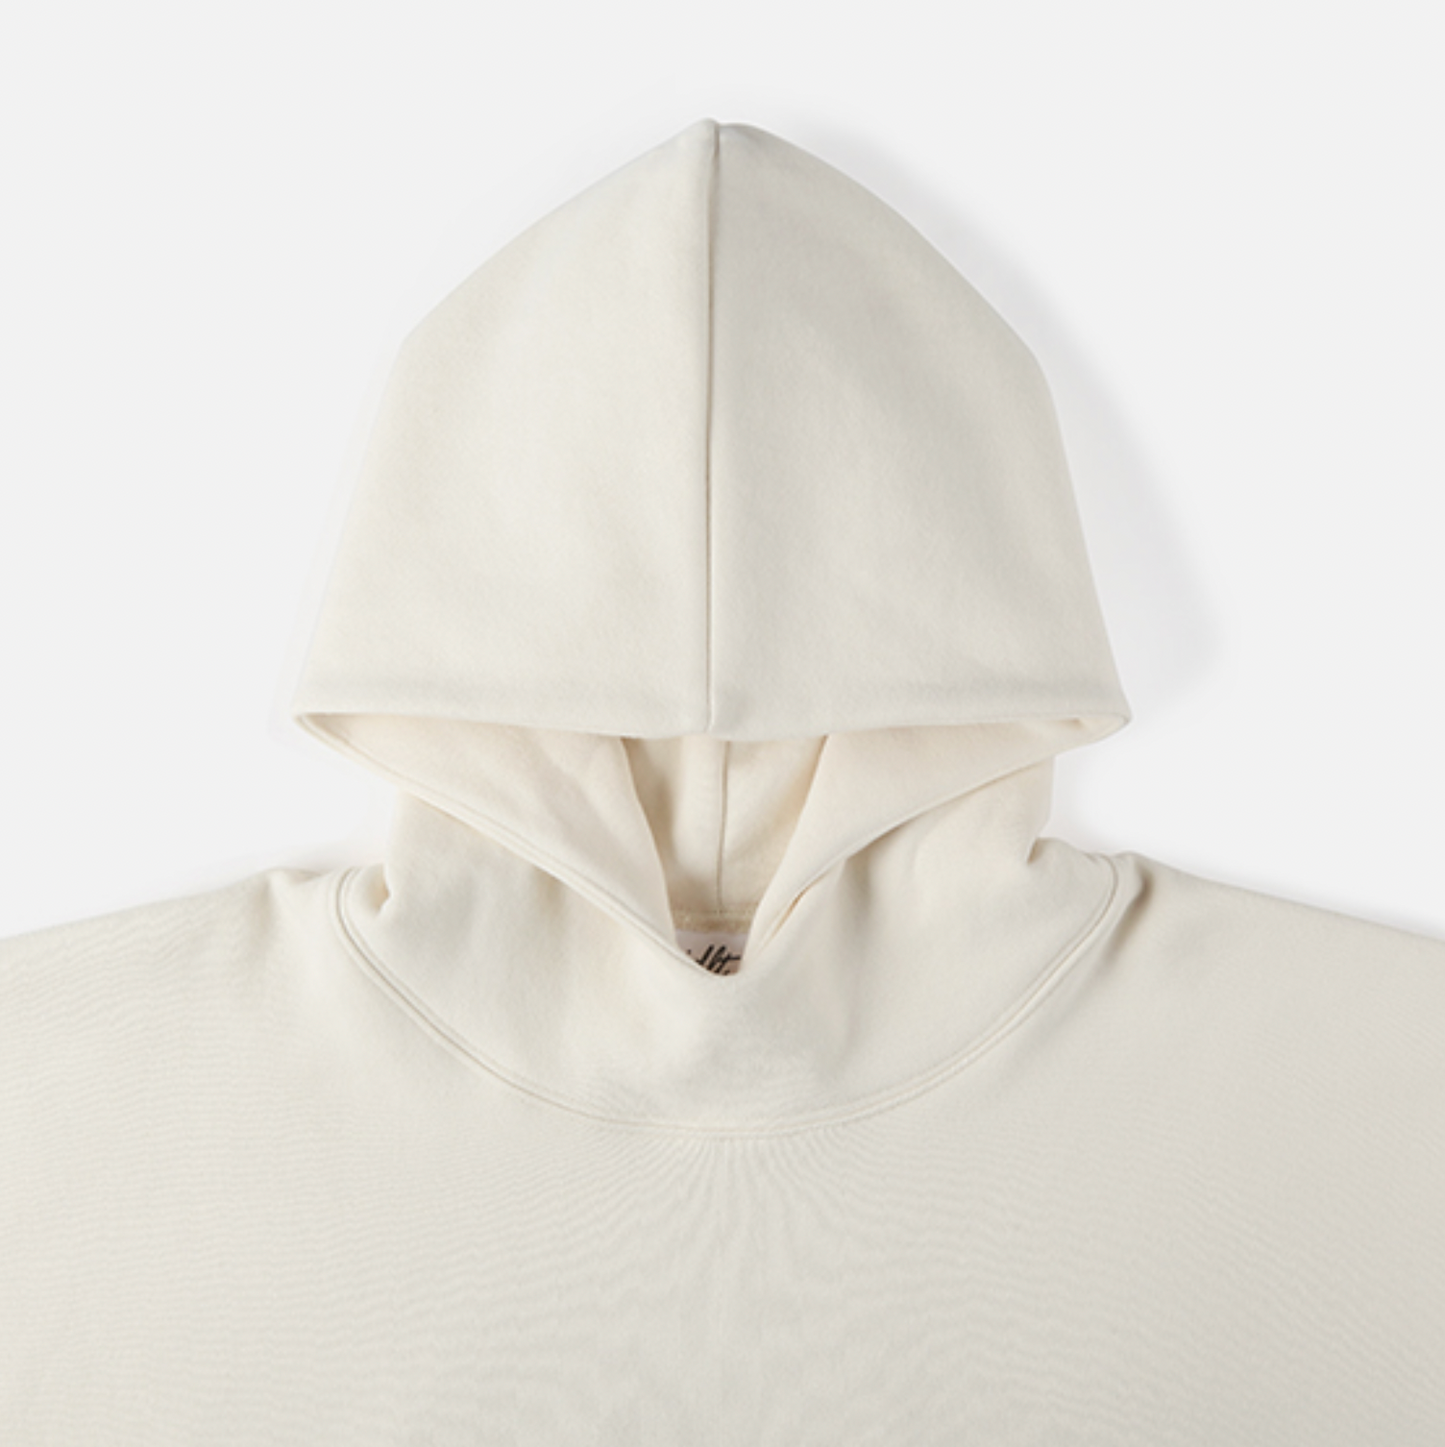 DF17 640G OVERSIZED DOUBLE LAYER FLEECED HOODIE - CLOUD WHITE